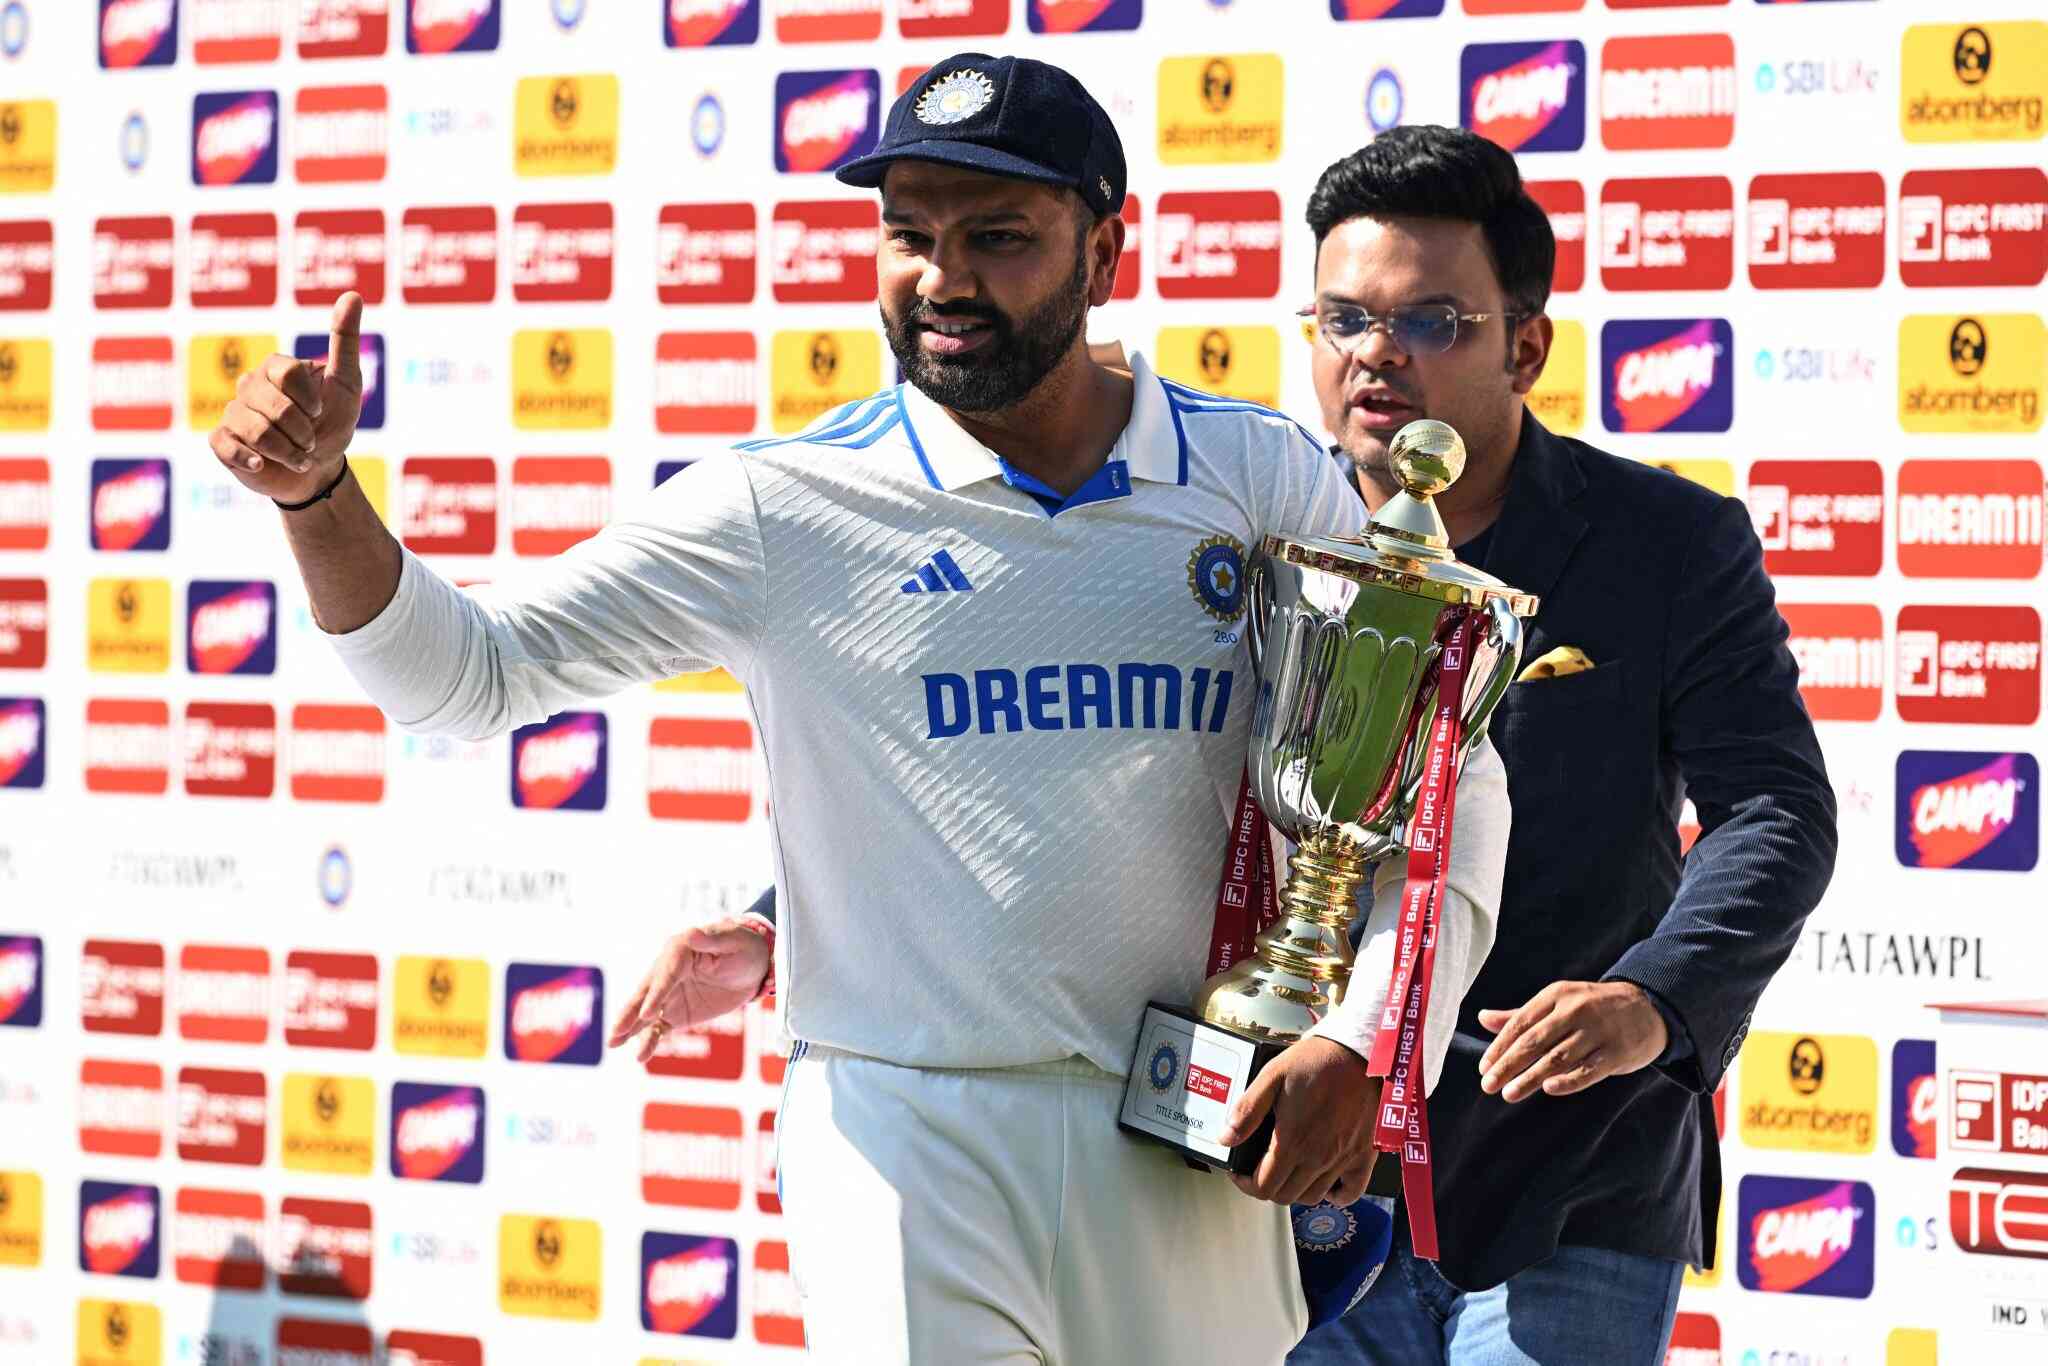 What Is India's Record In Test Cricket In 21st Century?